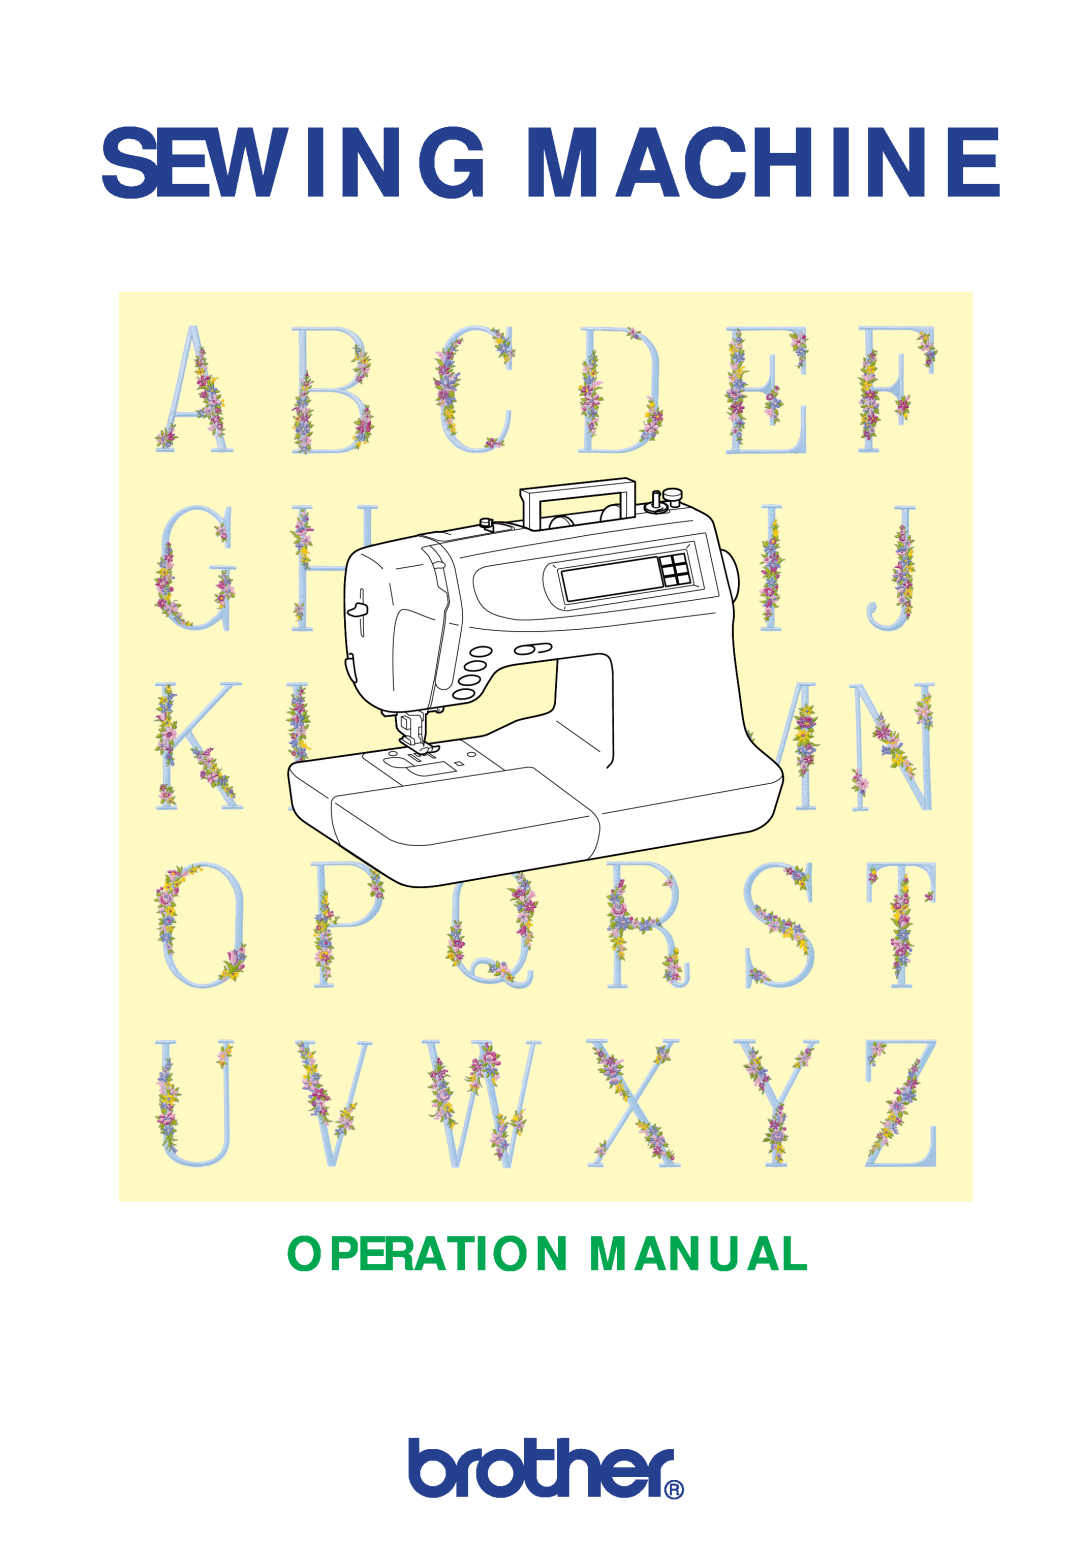 Brother PC 6500 operation manual Sewing Machine 